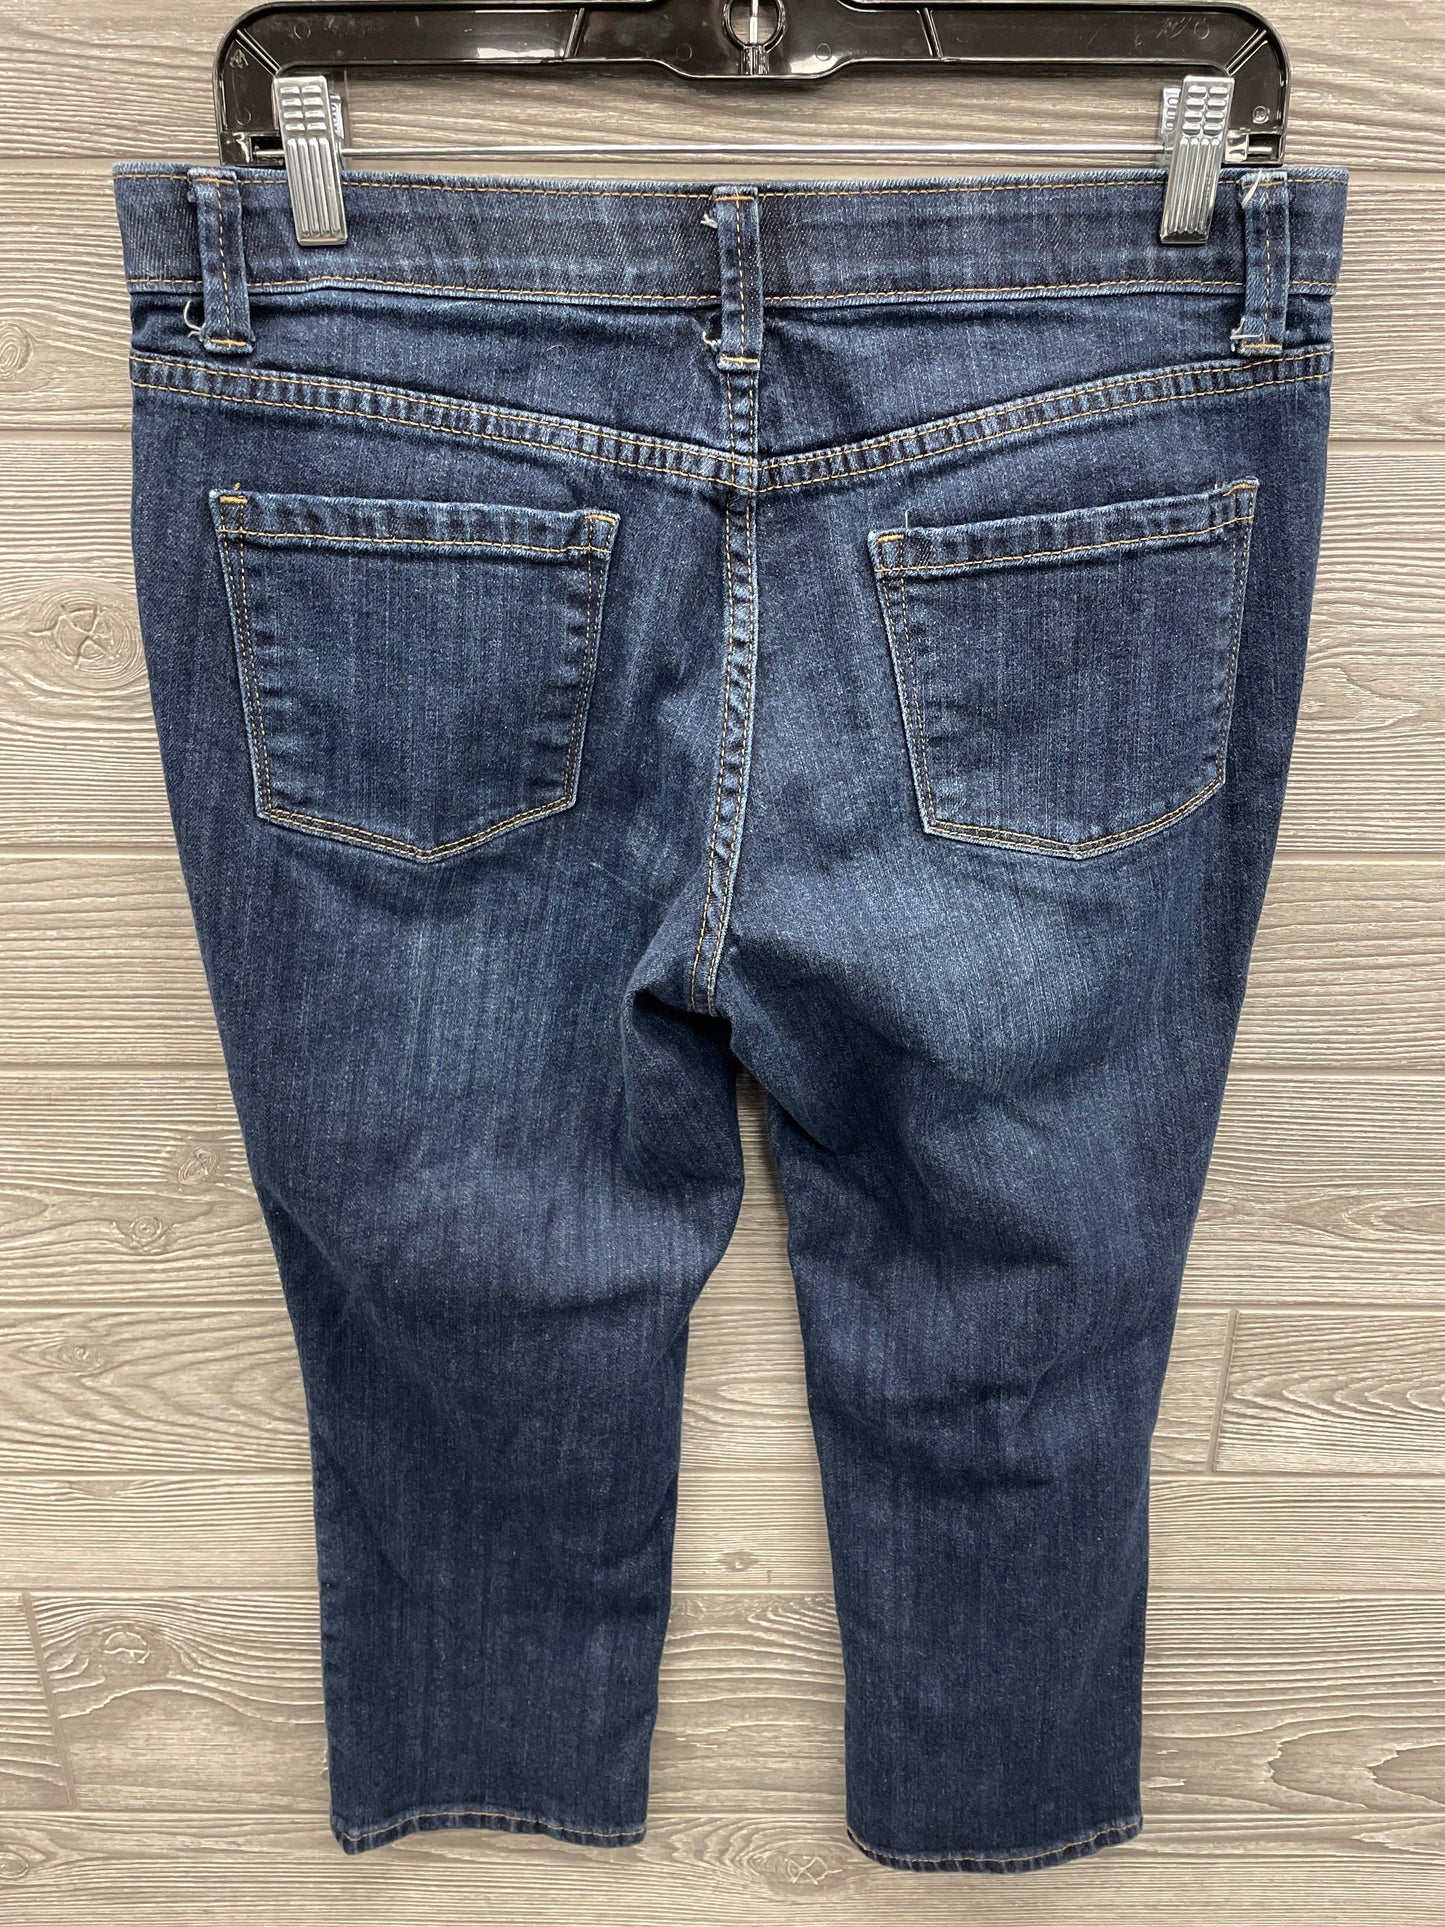 Jeans Straight By St Johns Bay  Size: 10petite